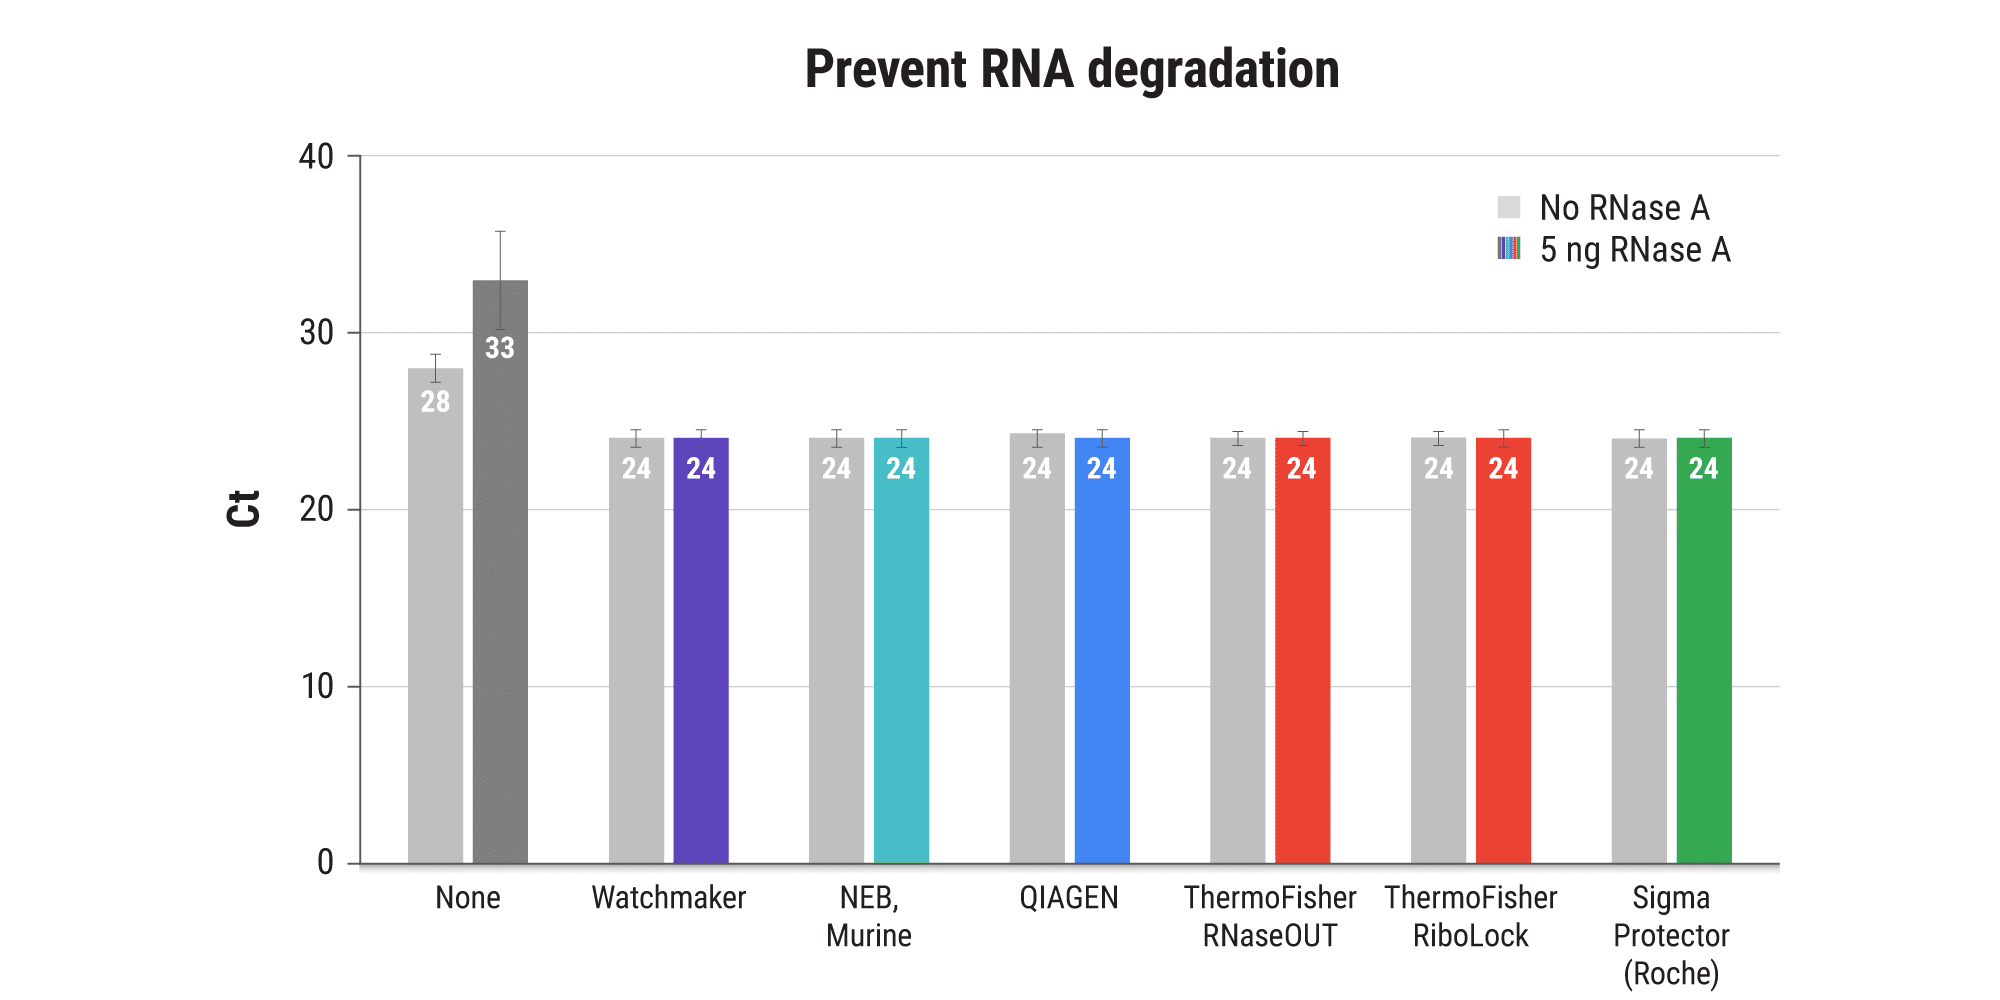 Figure 1A. Prevent RNA degradation through the addition of RNase inhibitor. The addition of RNase inhibitor to first strand synthesis (FSS) reactions improves cDNA yield even when no RNase A is added to the reaction — highlighting risks of RNase contamination during sample handling. Addition of 5 ng RNase A results in a >10-fold decrease in cDNA yield when no RNase inhibitor is present. Assay performance is rescued by the addition of RNase inhibitor, where all commercial enzymes evaluated perform equivalently.  RNase Inhibitors sourced from a variety of vendors were added to oligo-dT-primed FSS reactions with StellarScript HT+ Reverse Transcriptase. Reactions ran for 30 min at 42°C using 10 ng total liver RNA.